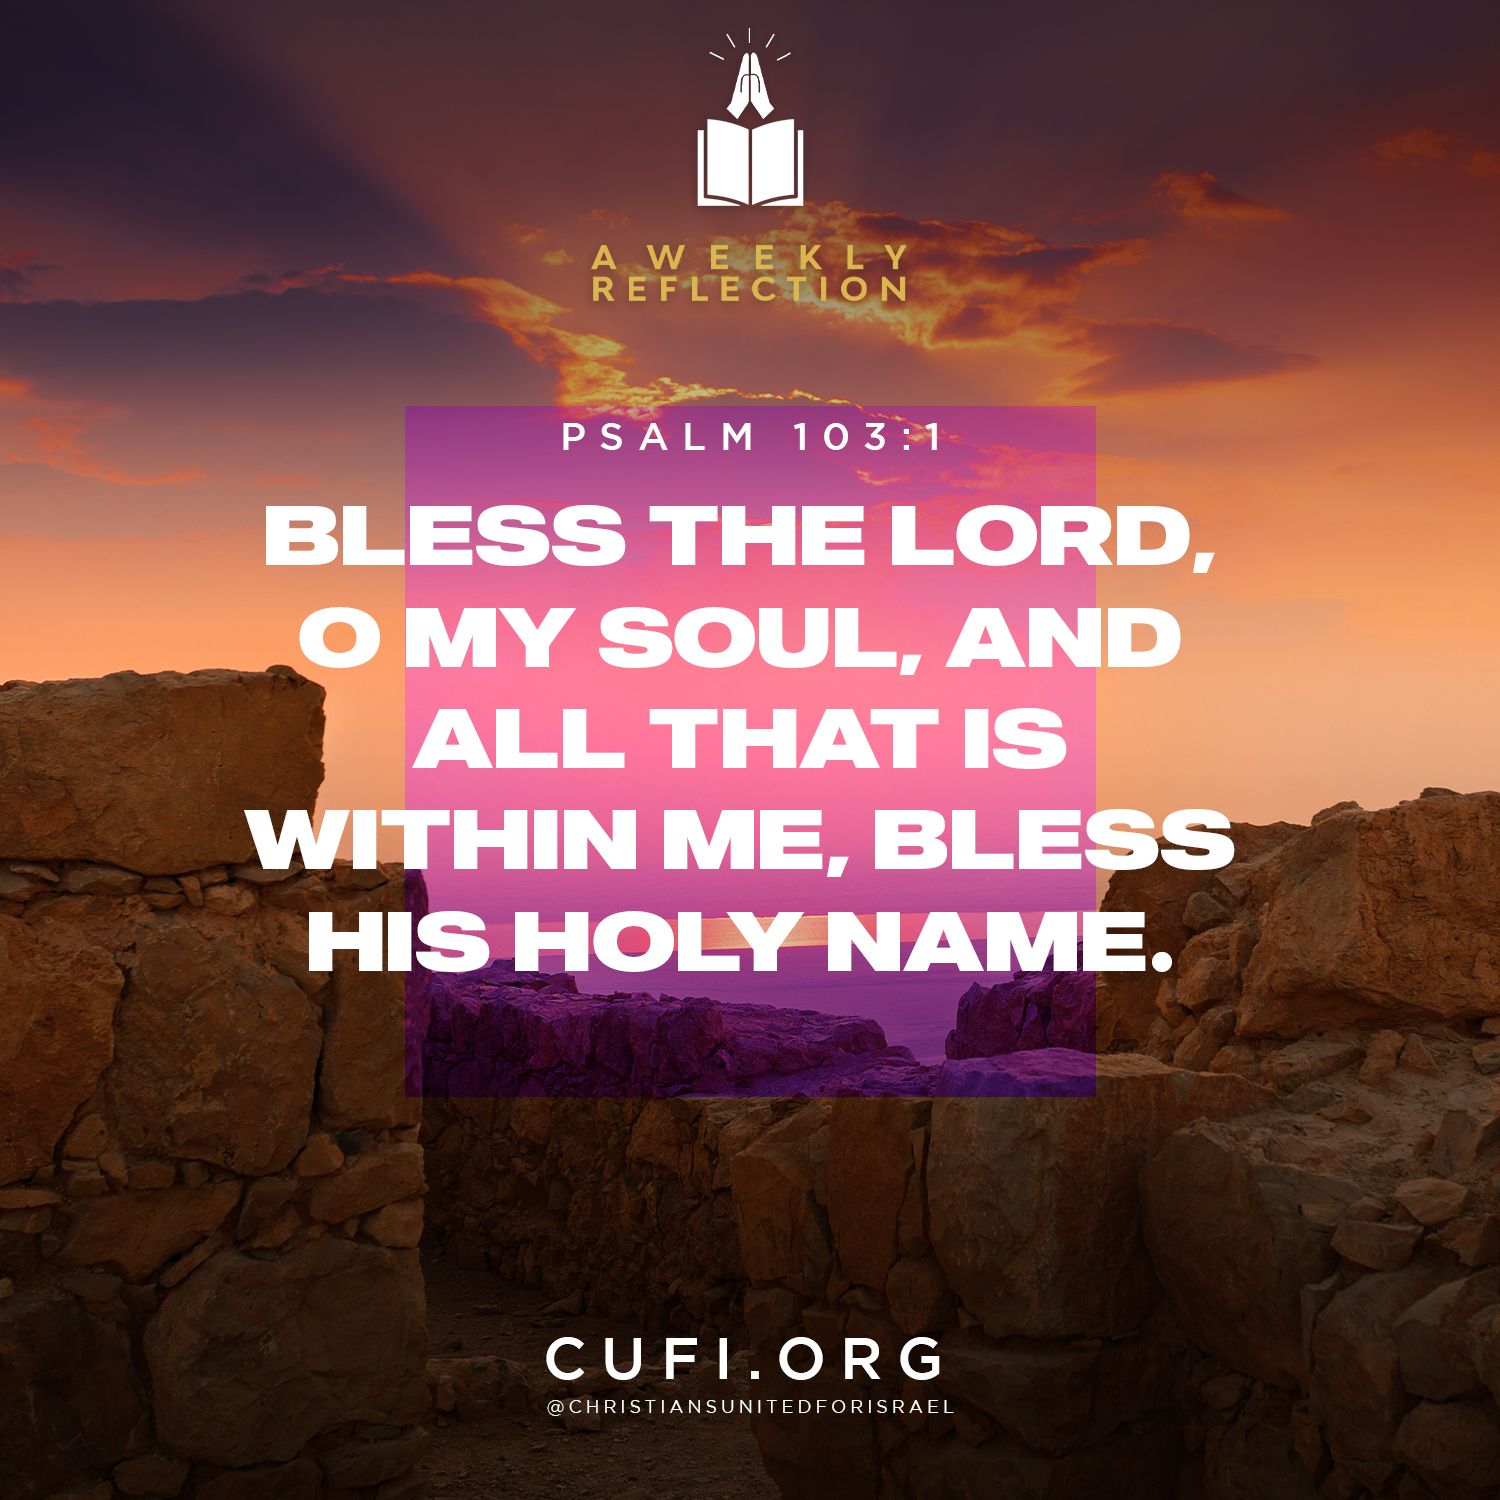 'AWEEKLY REFLECTION PSALM 103:1 BLESS THE LORD, OMY SOUL, AND ALL THAT IS WITHIN ME, BLESS HIS HOLY NAME. CUFI.ORG @CHRIS ANSUNITE DFOR SRAEL'